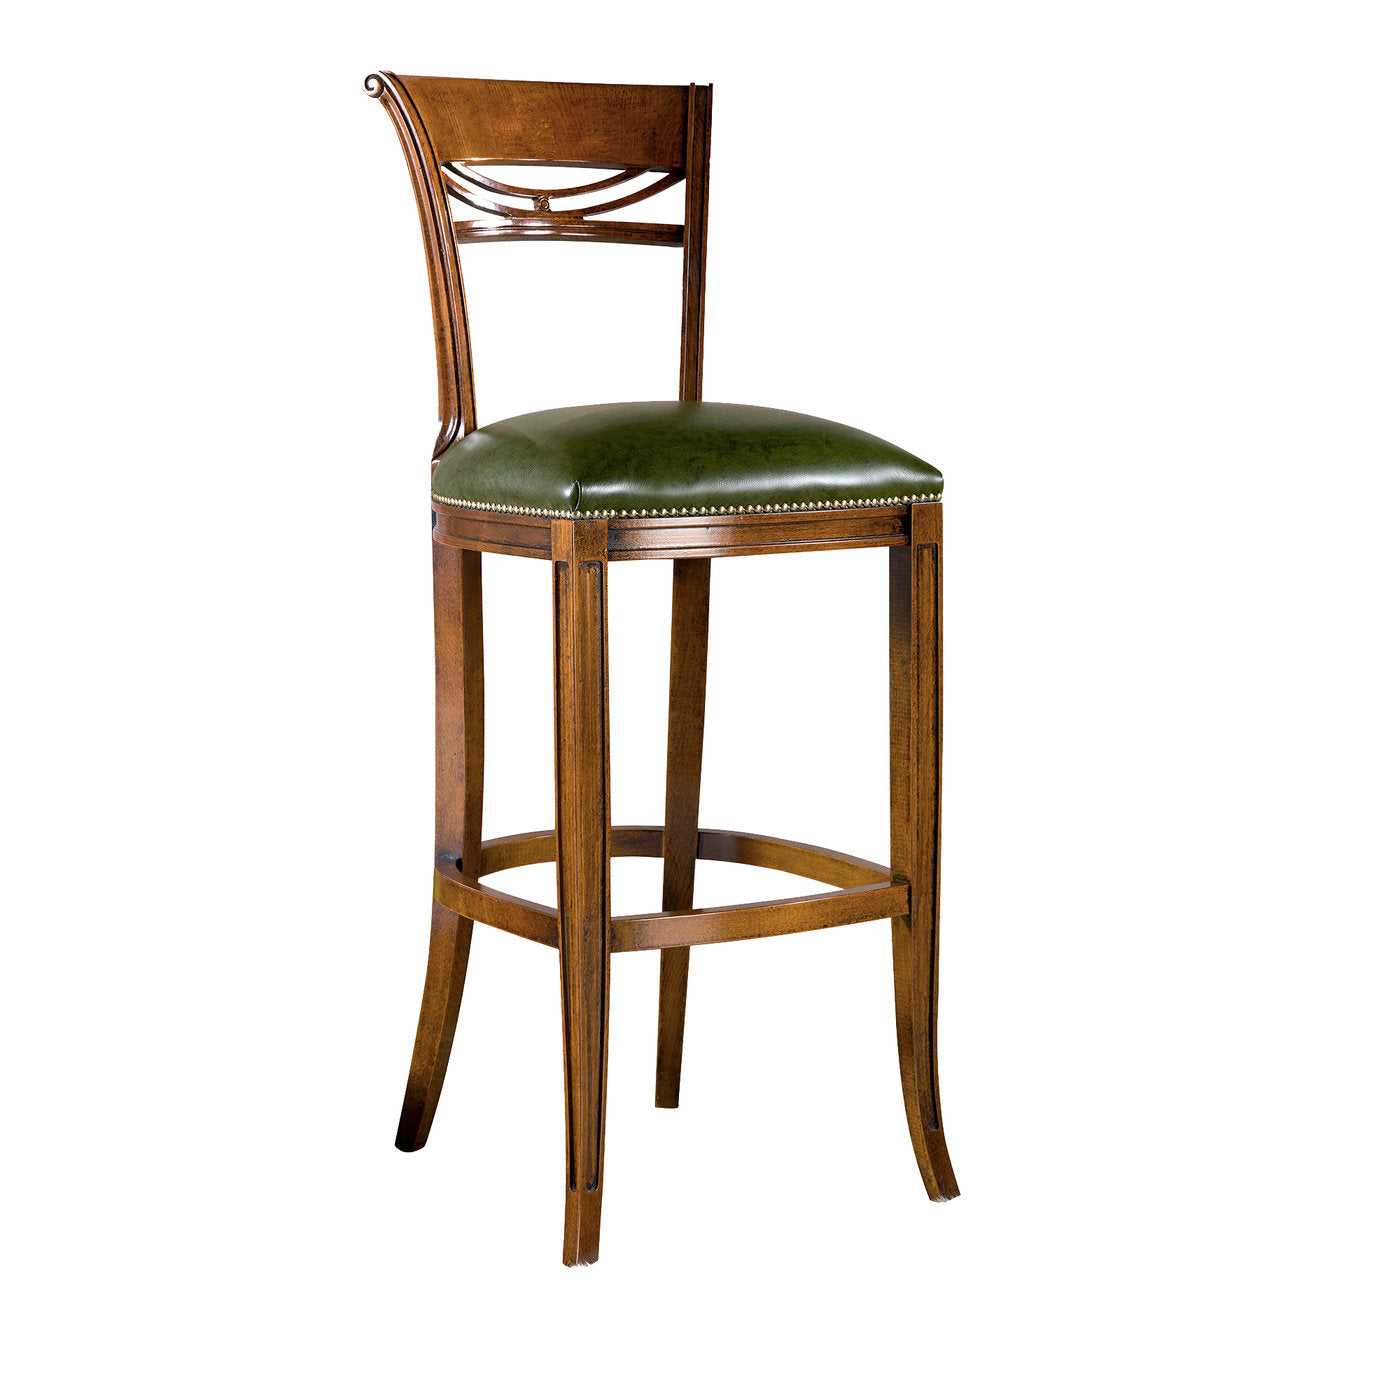 Green Leather Bar Stool with Backrest - Main view